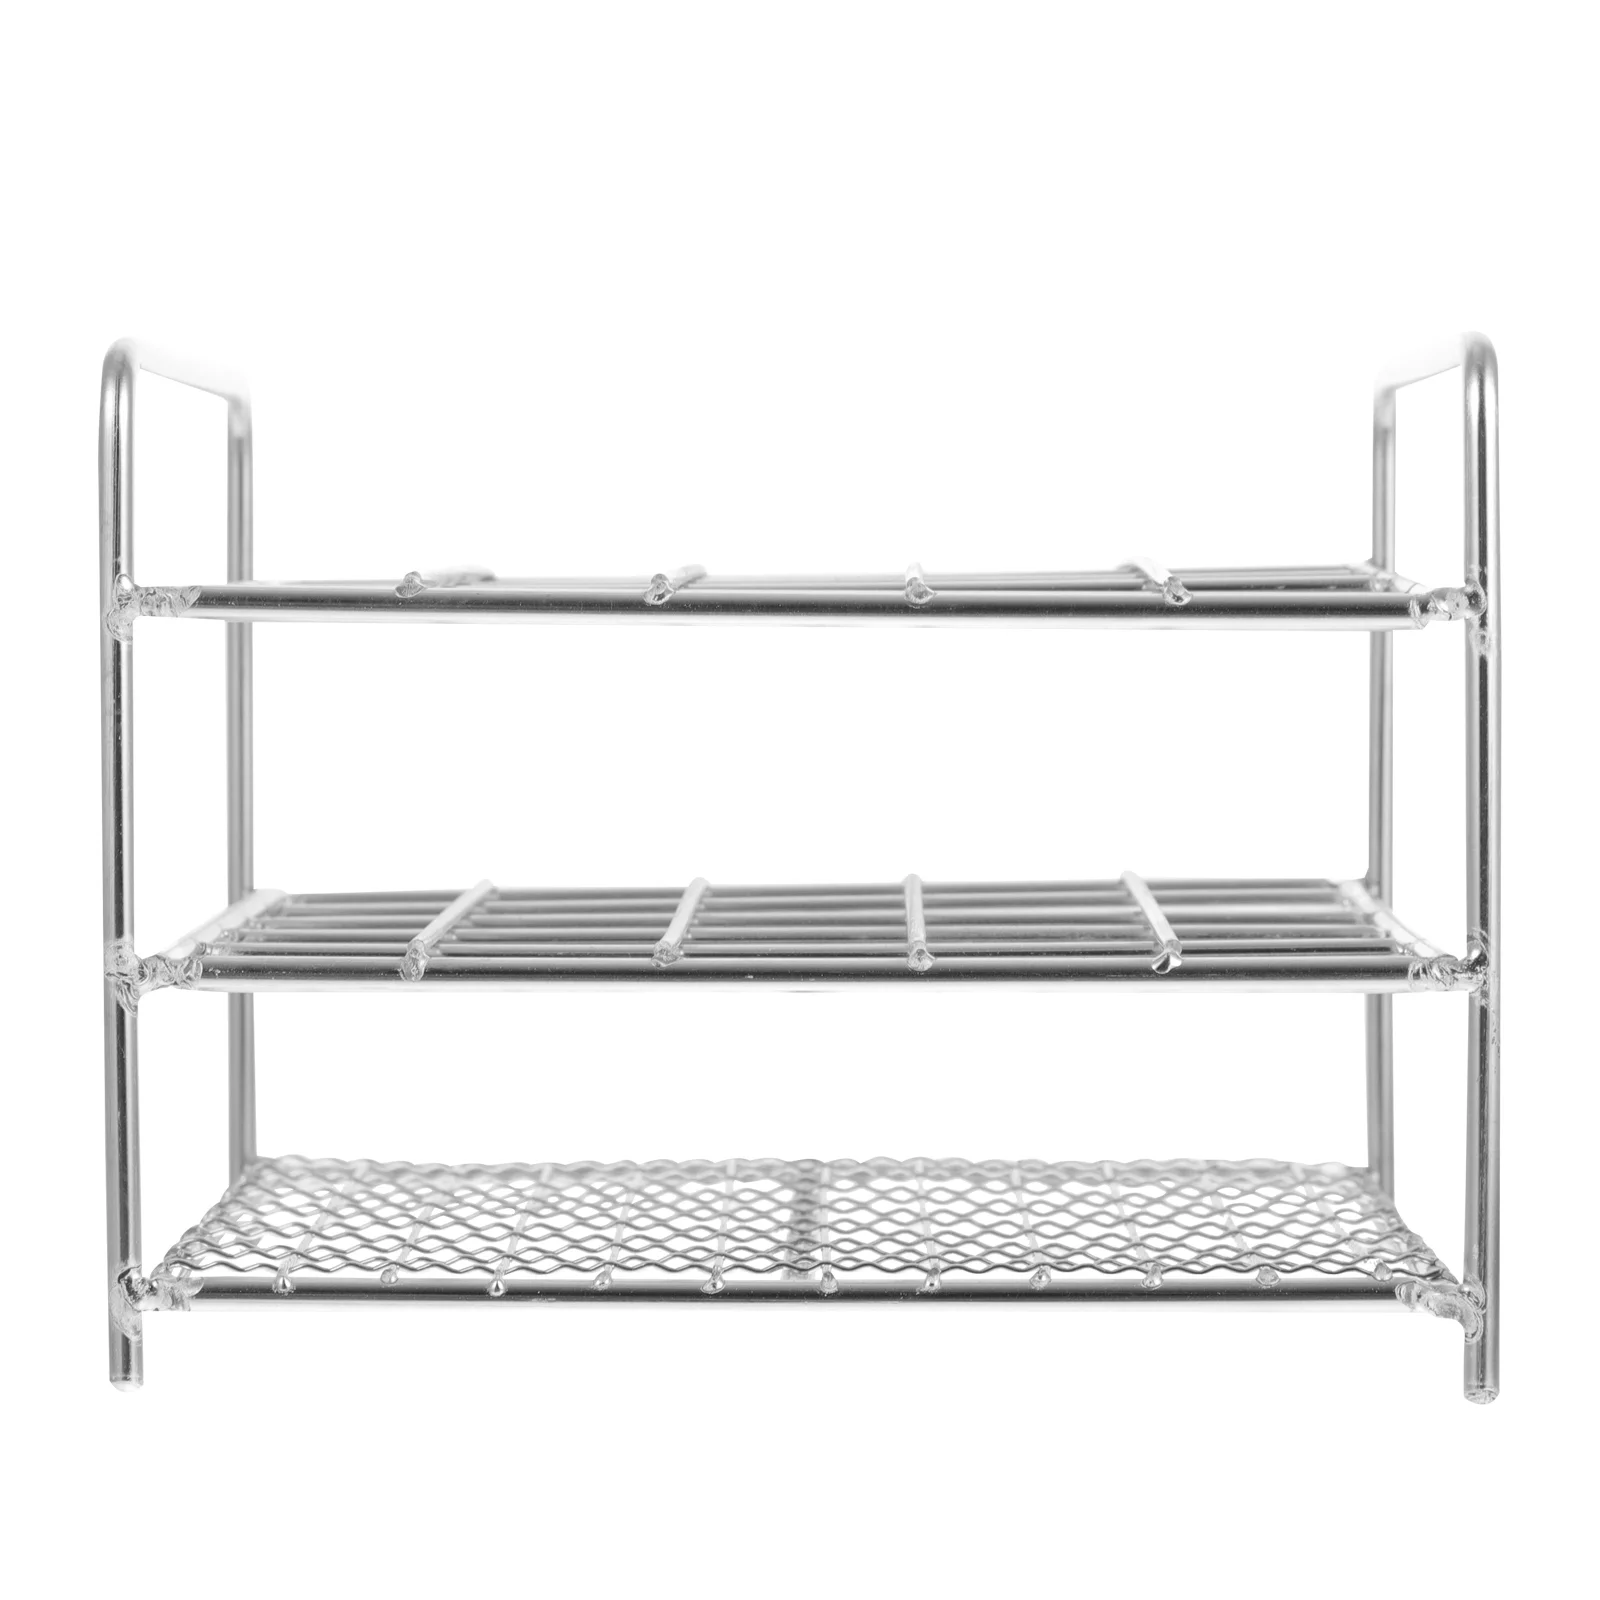 

Test Tube Rack Laboratory Container Square Holder Stand Stainless Steel Shelf Export Type Experiment Hole Metal